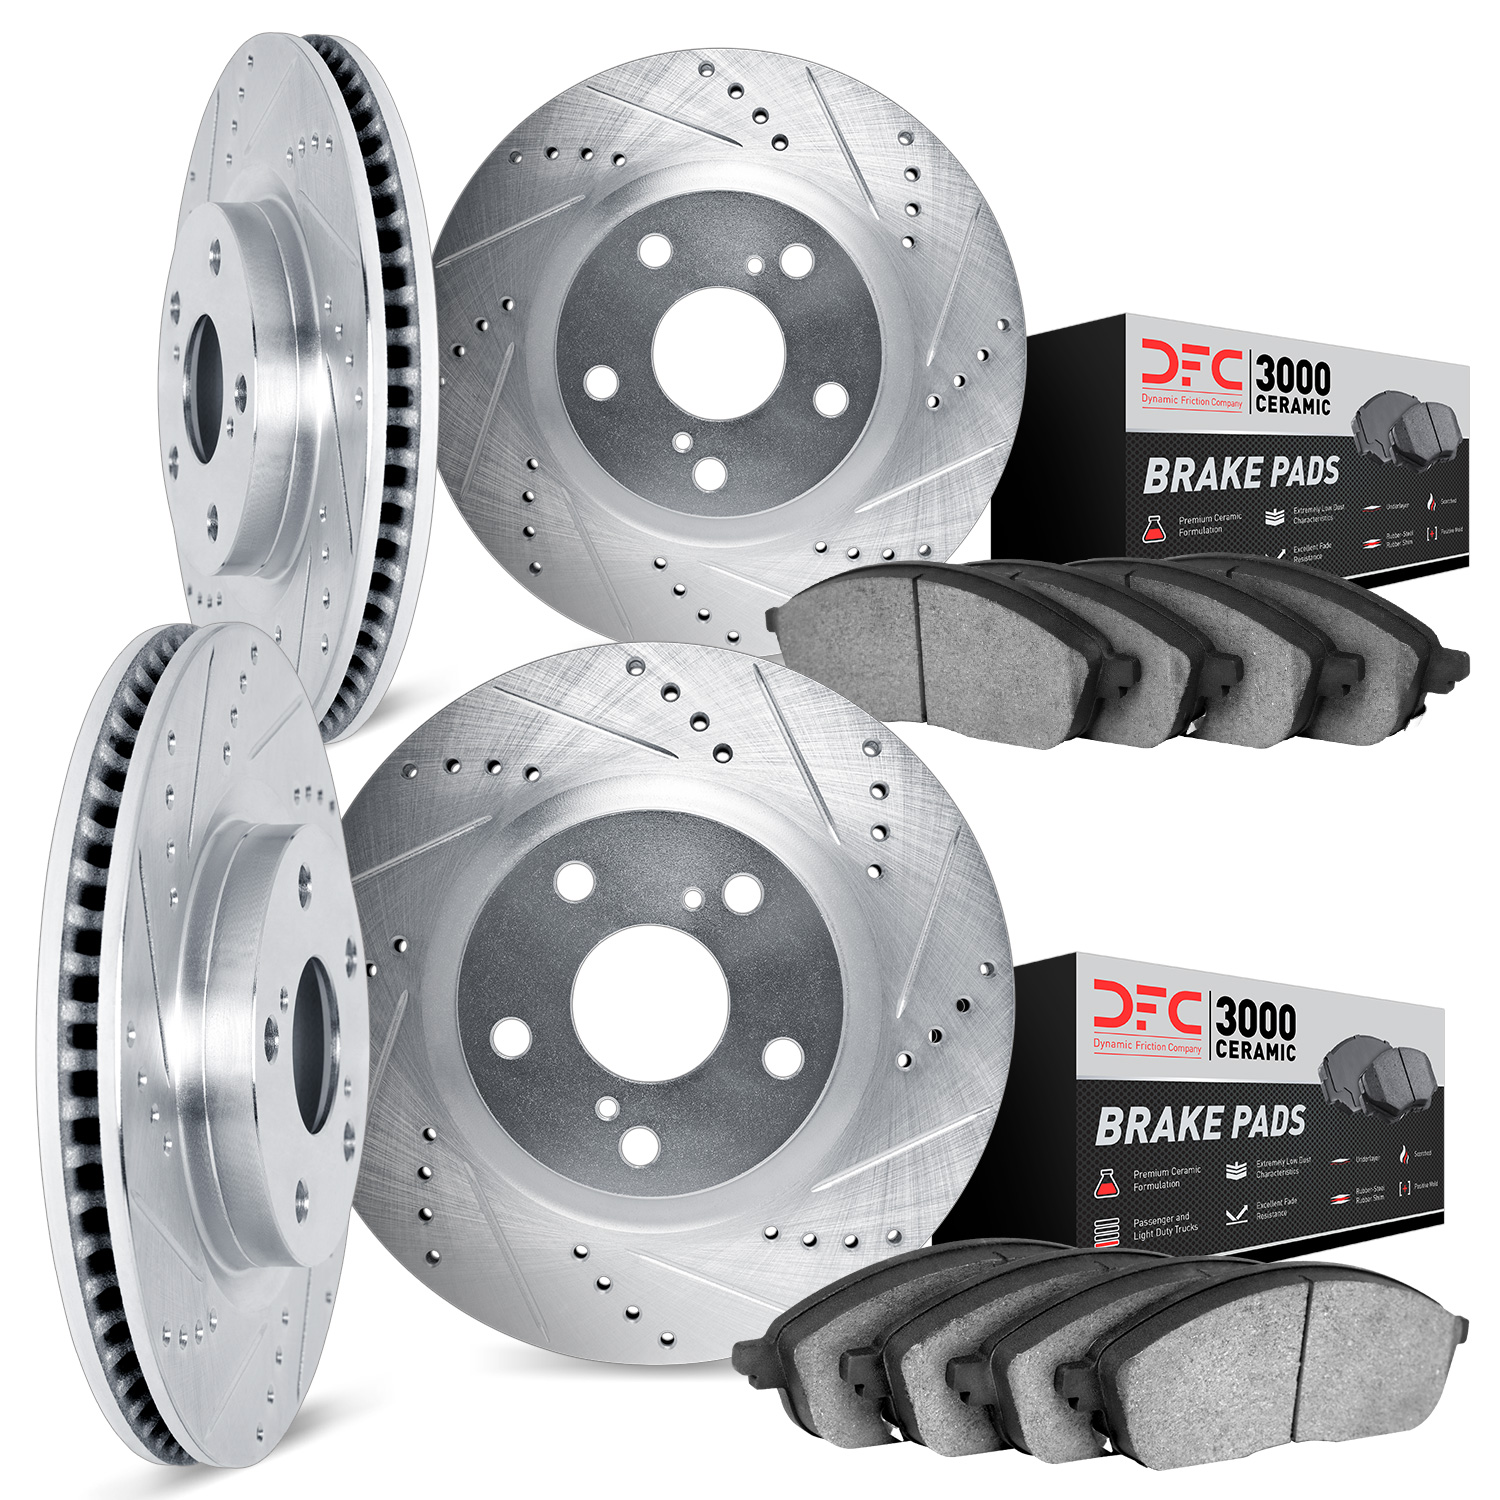 7304-80032 Drilled/Slotted Brake Rotor with 3000-Series Ceramic Brake Pads Kit [Silver], 2007-2012 Ford/Lincoln/Mercury/Mazda, P